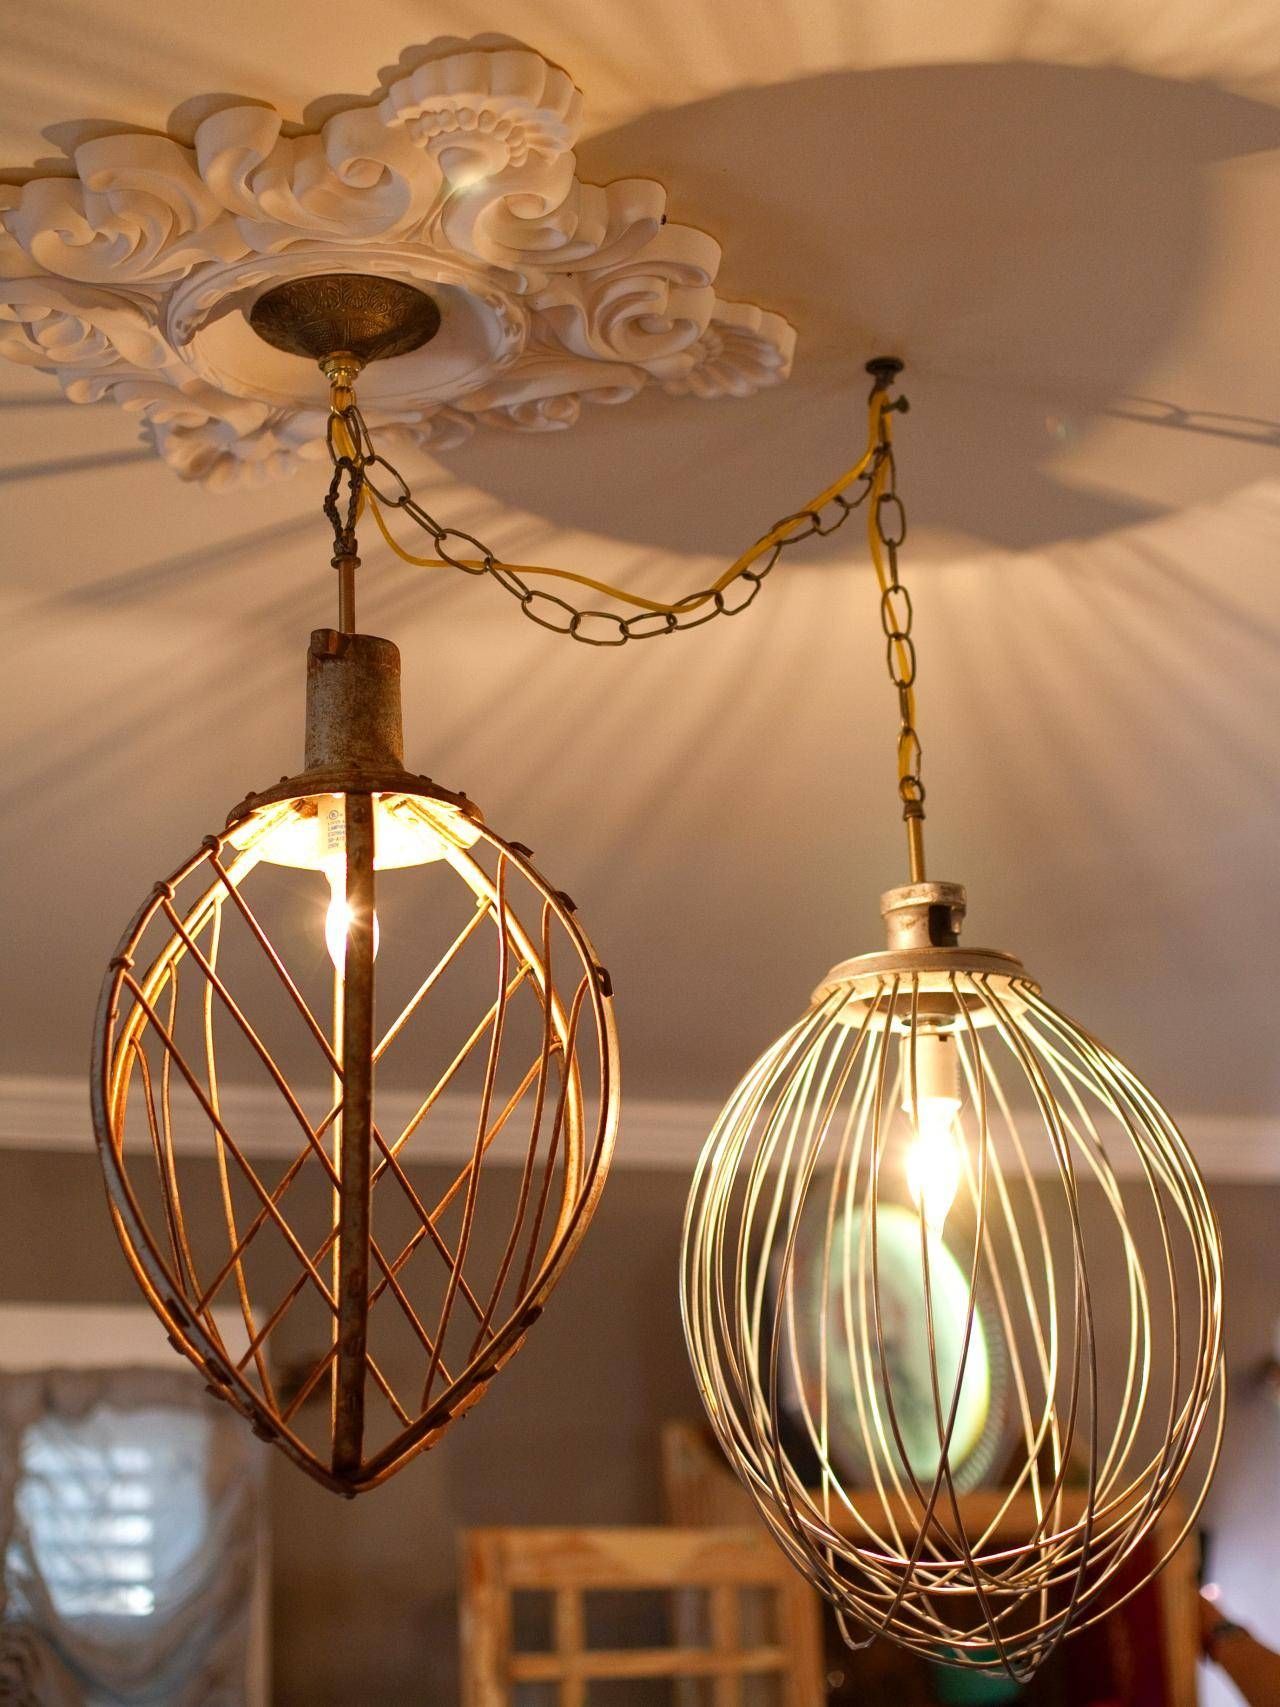 Brighten Up With These Diy Home Lighting Ideas | Hgtv's Decorating For Homemade Pendant Lights (View 5 of 15)